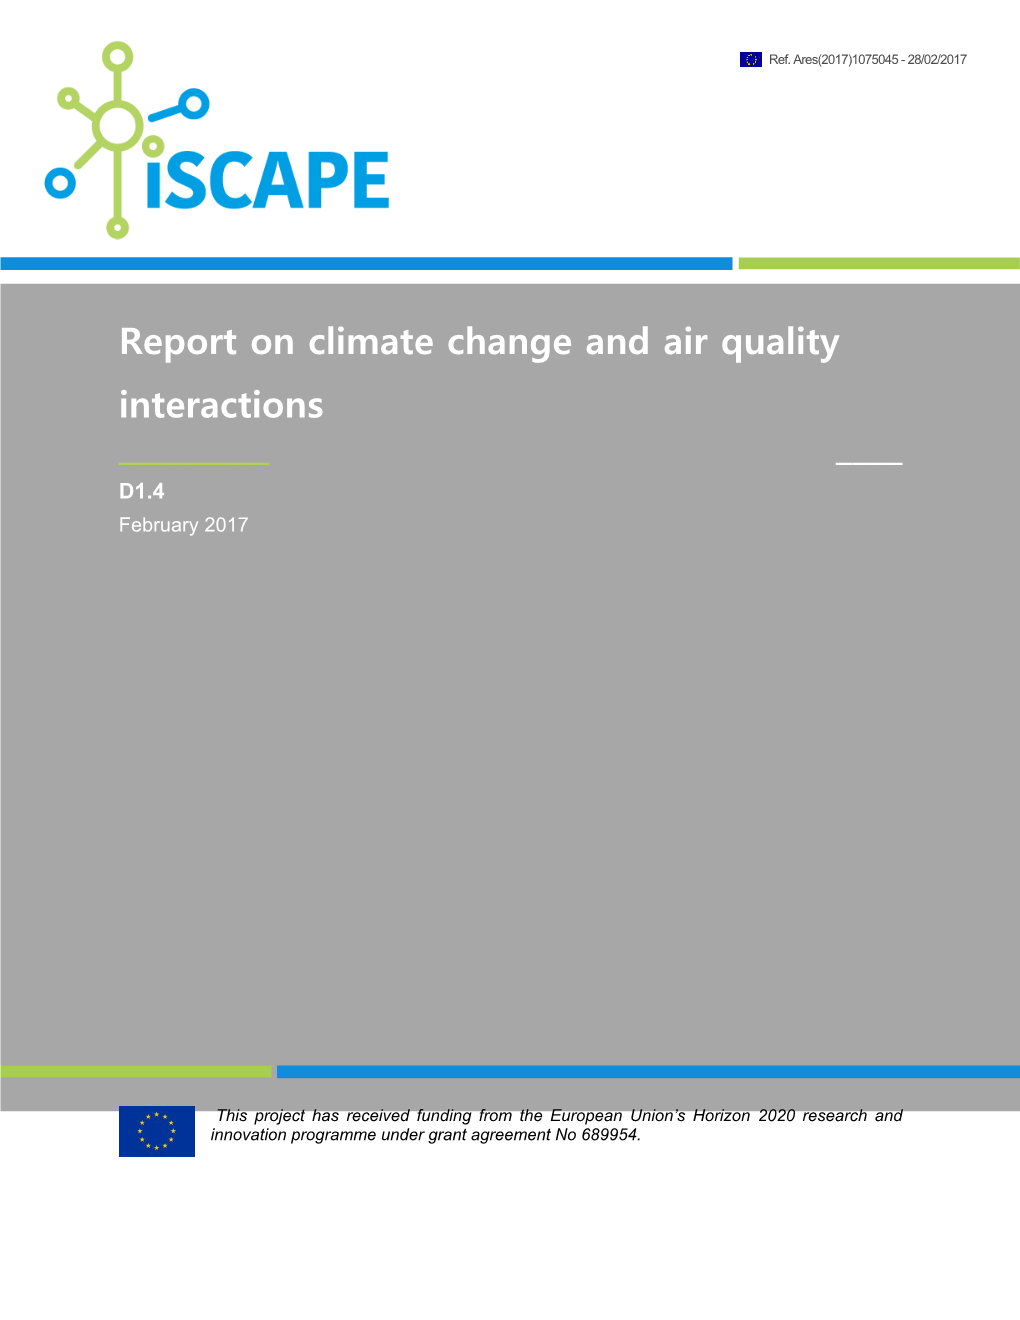 Report on Climate Change and Air Quality Interactions